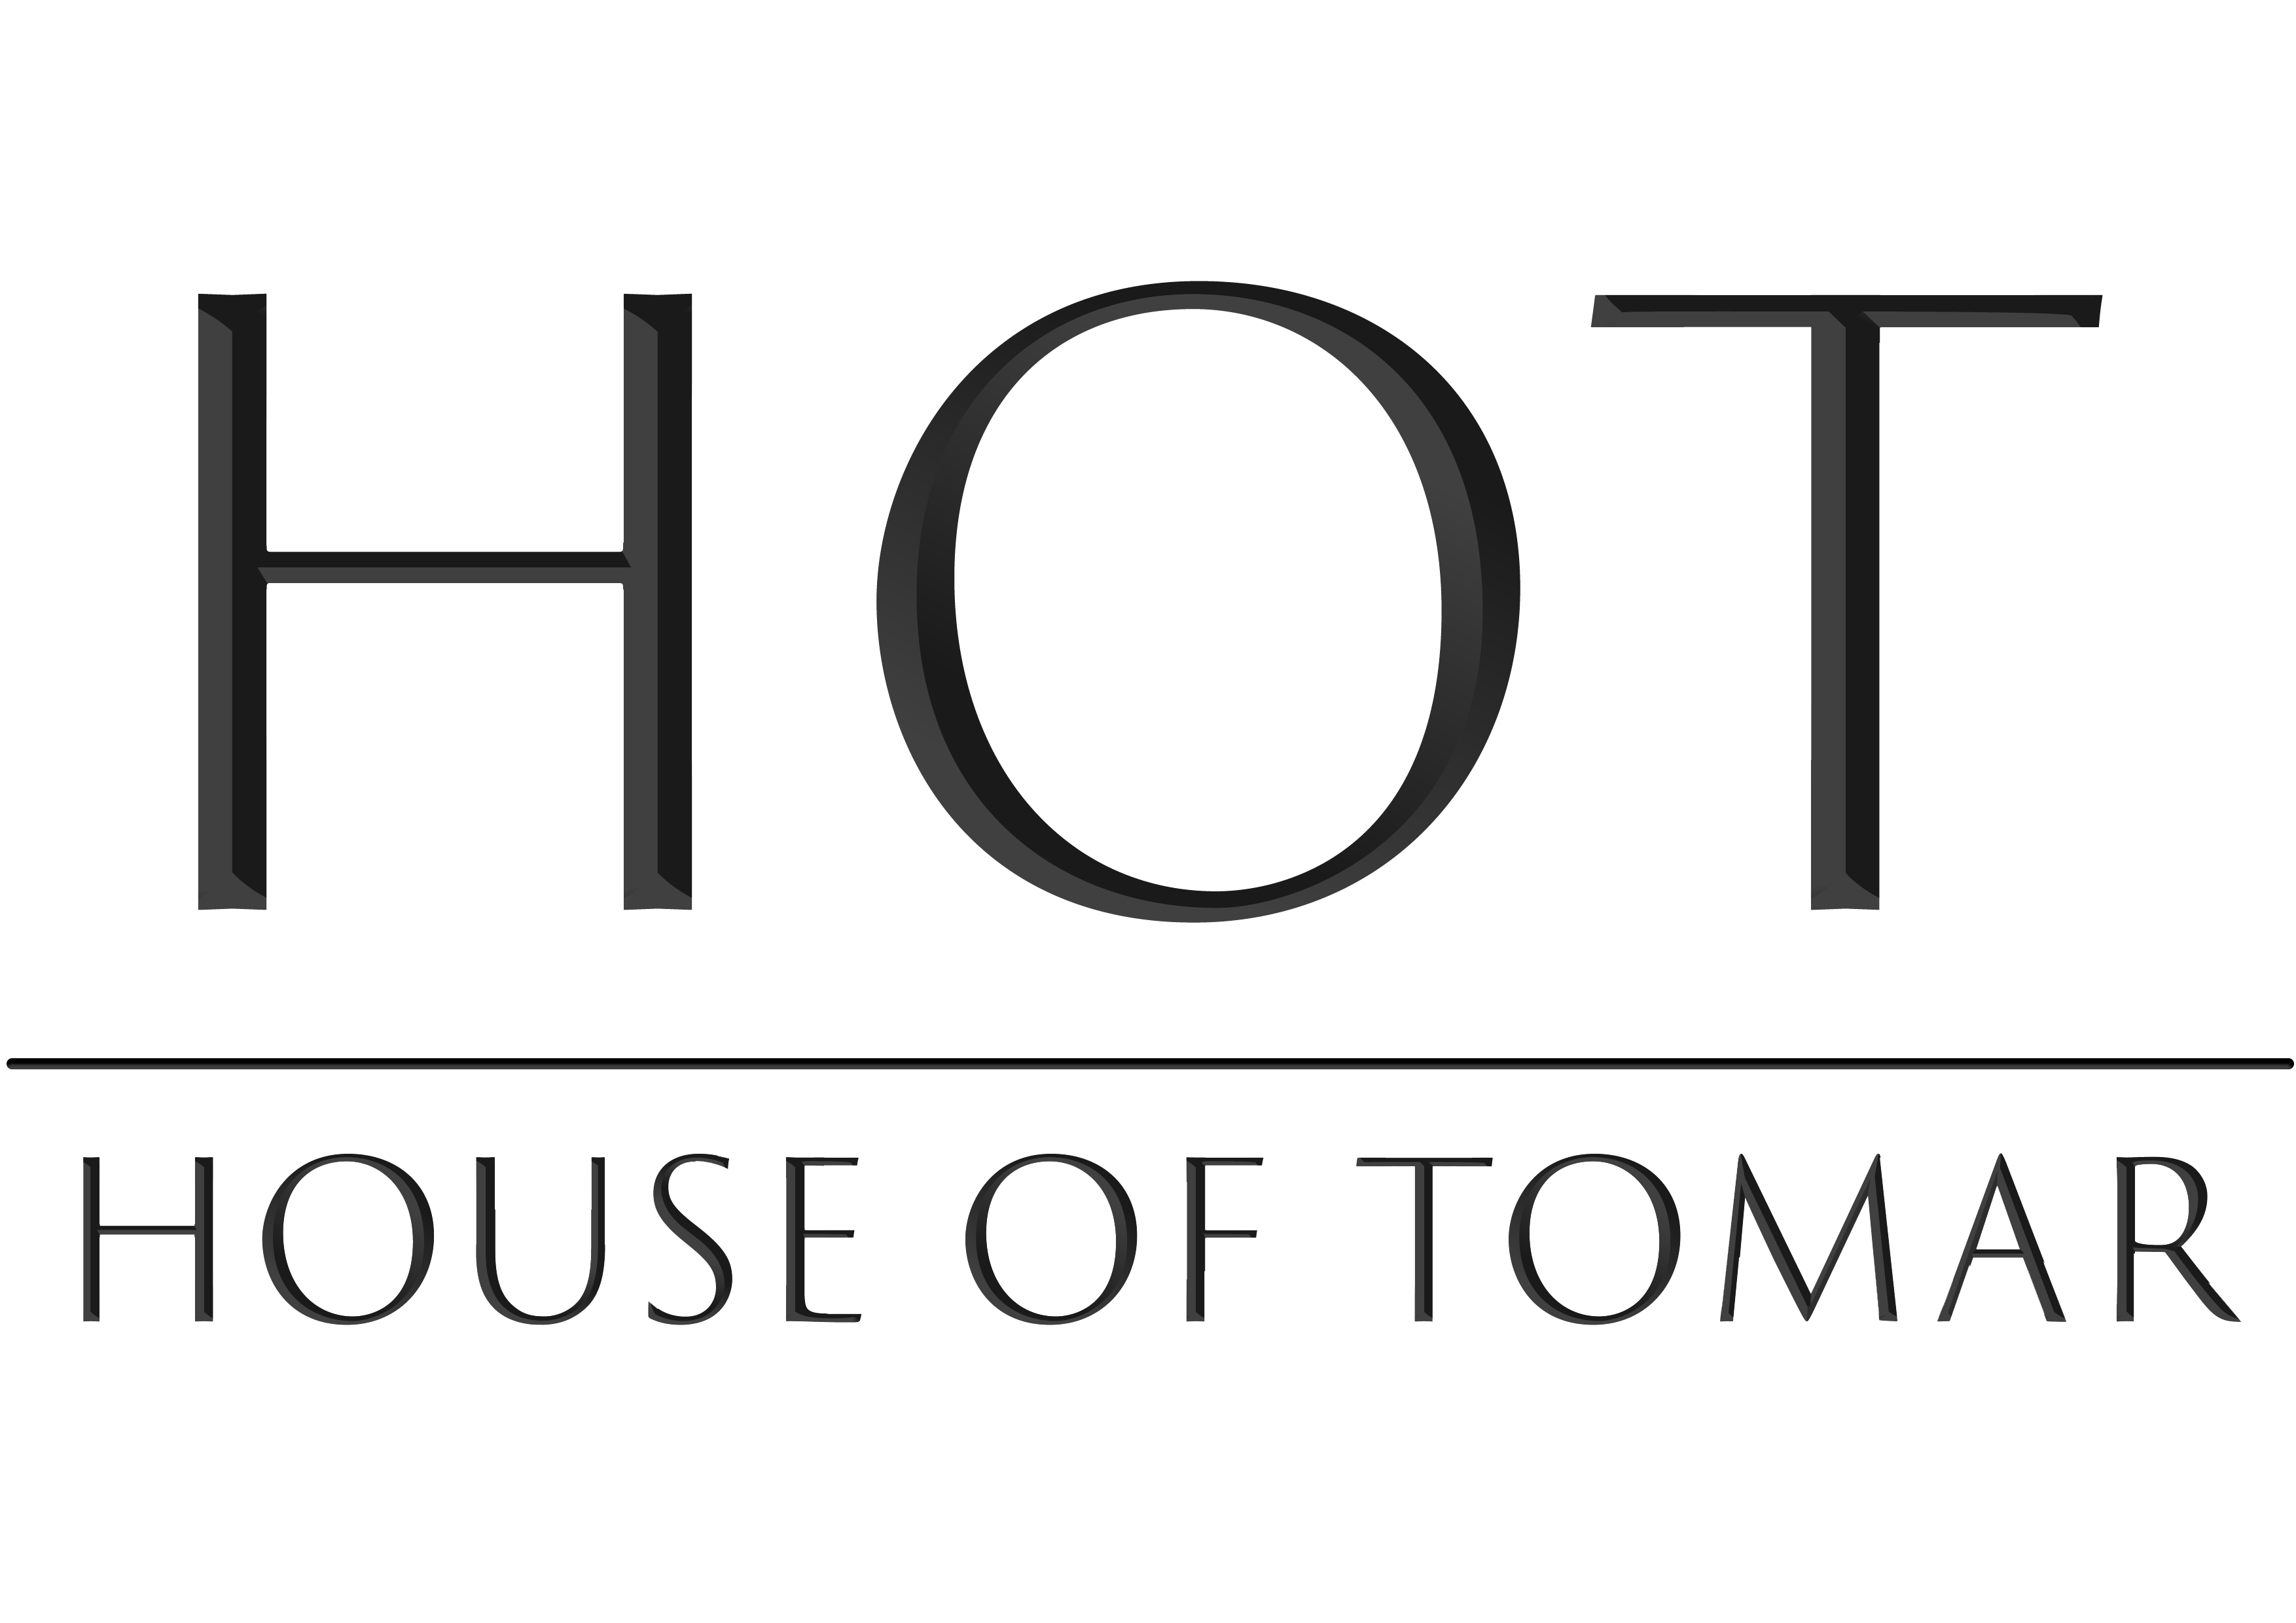 Company Logo For House of tomar'